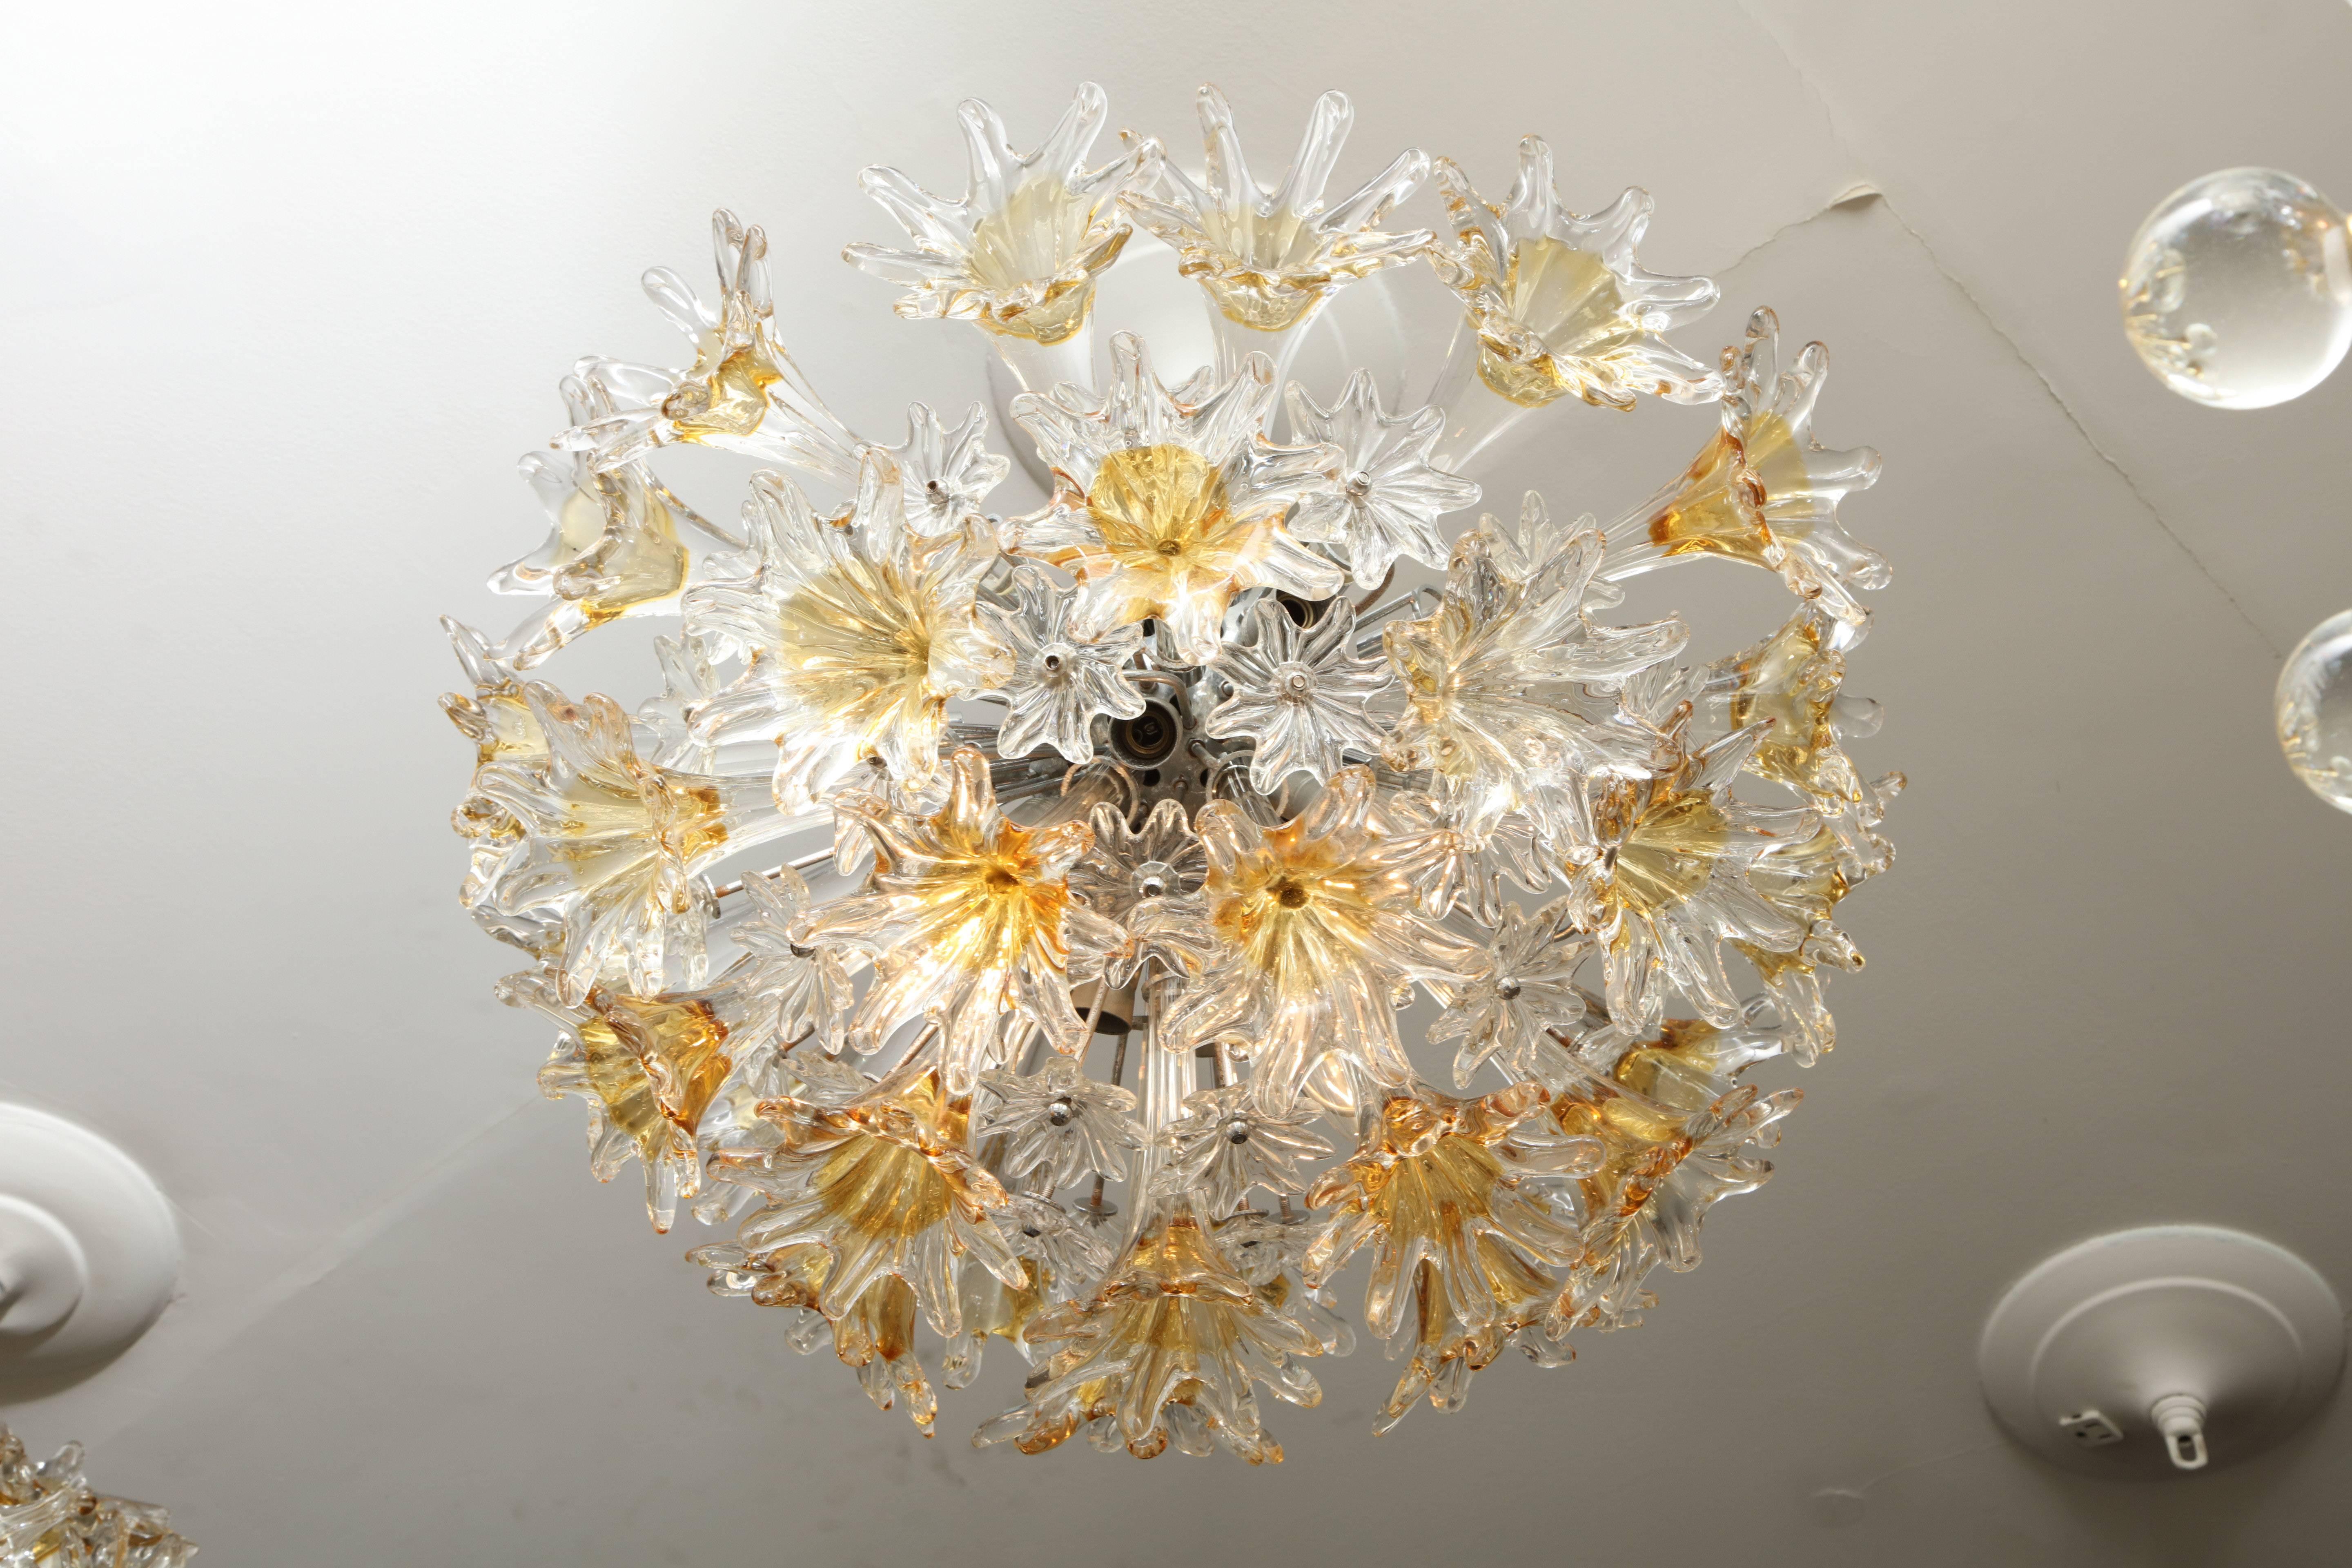 Vintage Venini Esprit Flush Mount. It is a one of kind flush mount fixture with floral shaped glass in clear and amber colors.